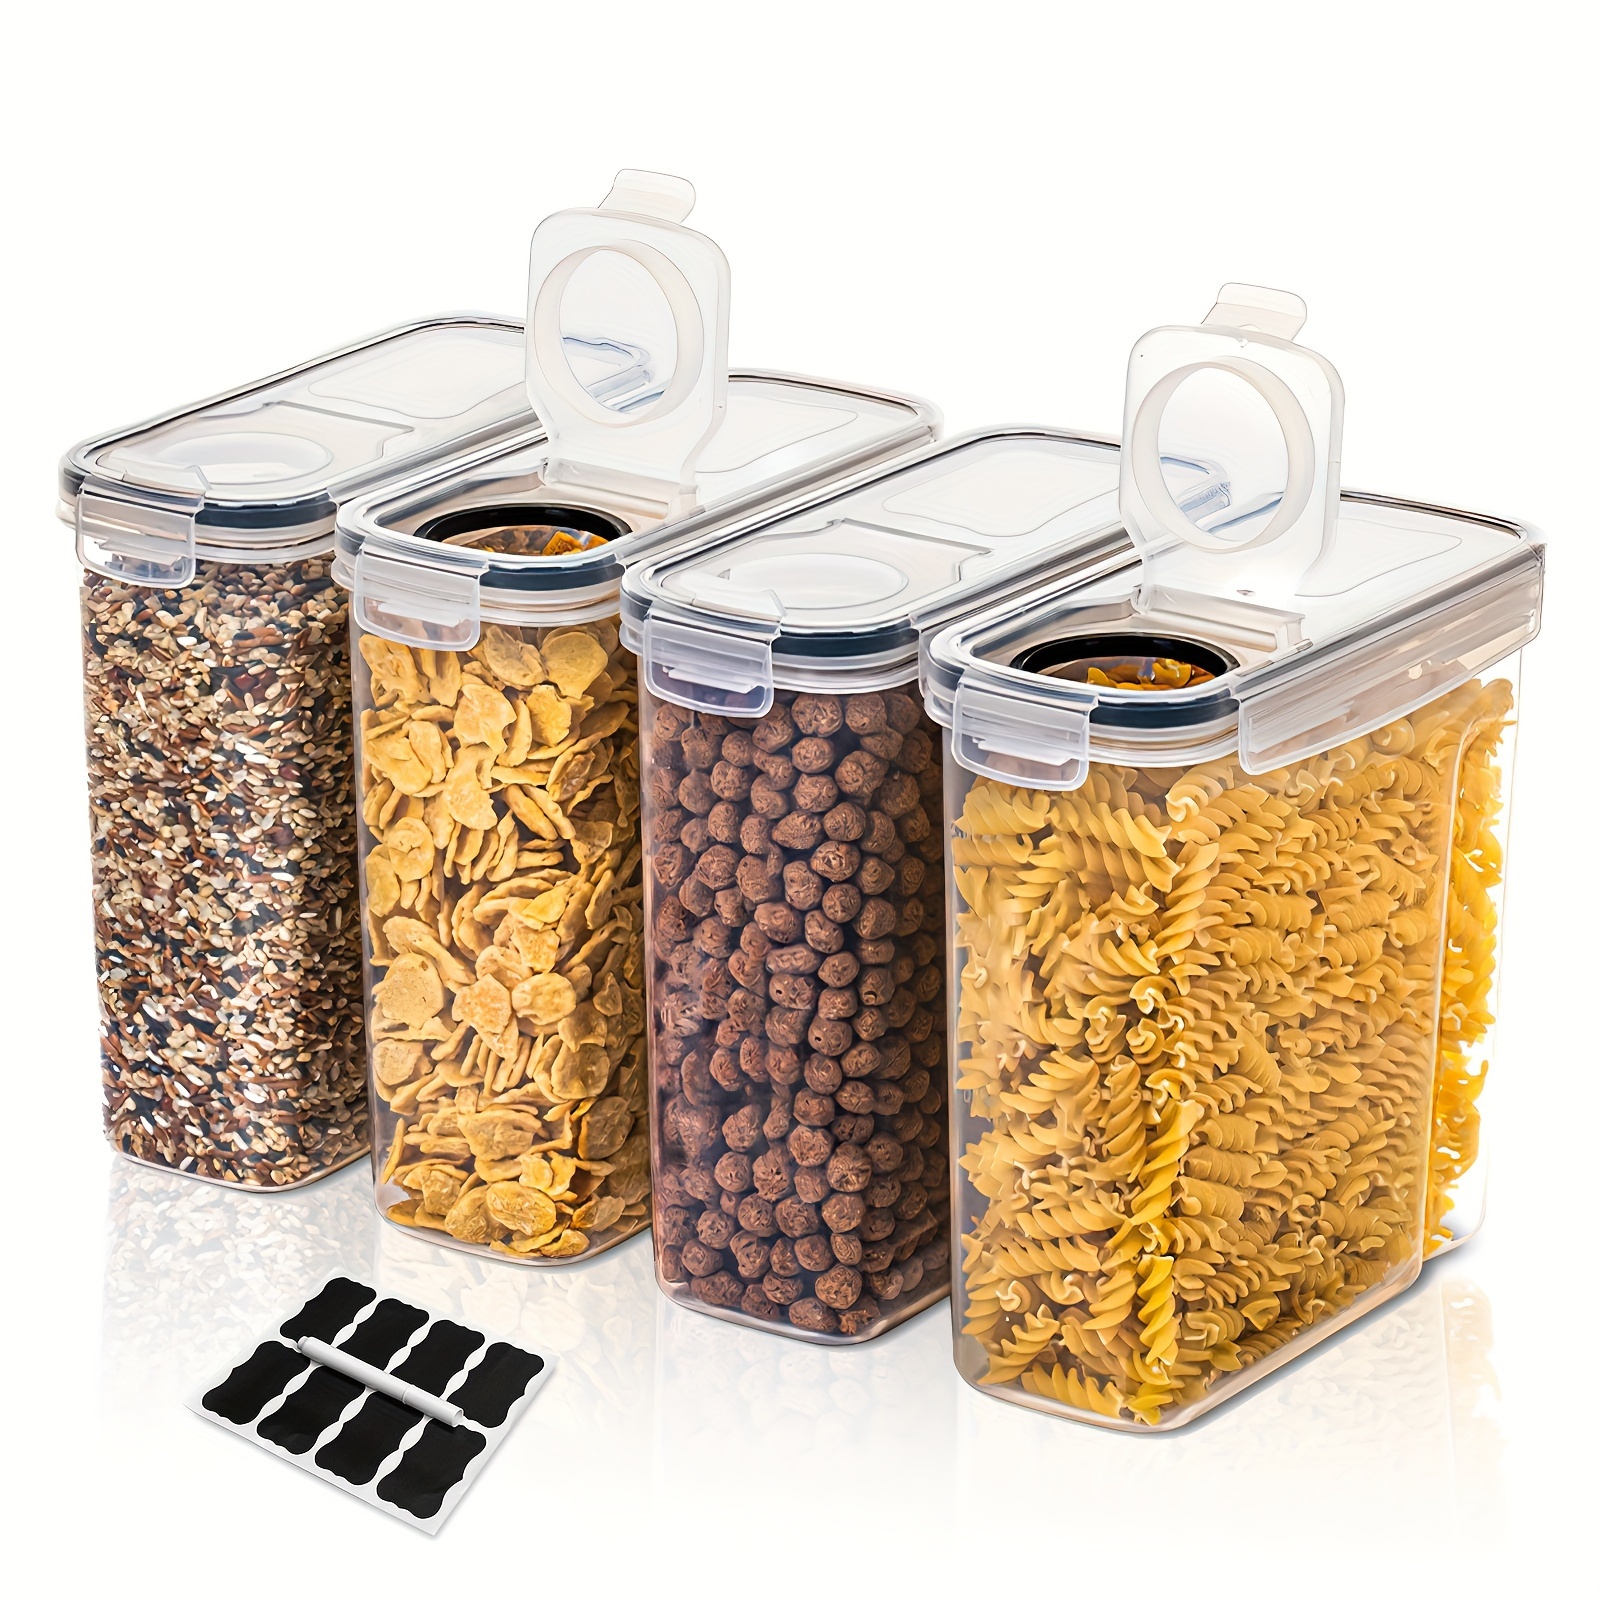 

4 Pack Cereal Storage Container Set, Bpa Free Plastic Airtight Food Storage Containers 2.5l/88 Oz For Cereal, Snacks And Sugar, 4 Piece Set Cereal Dispensers With Chalkboard Labels, Black